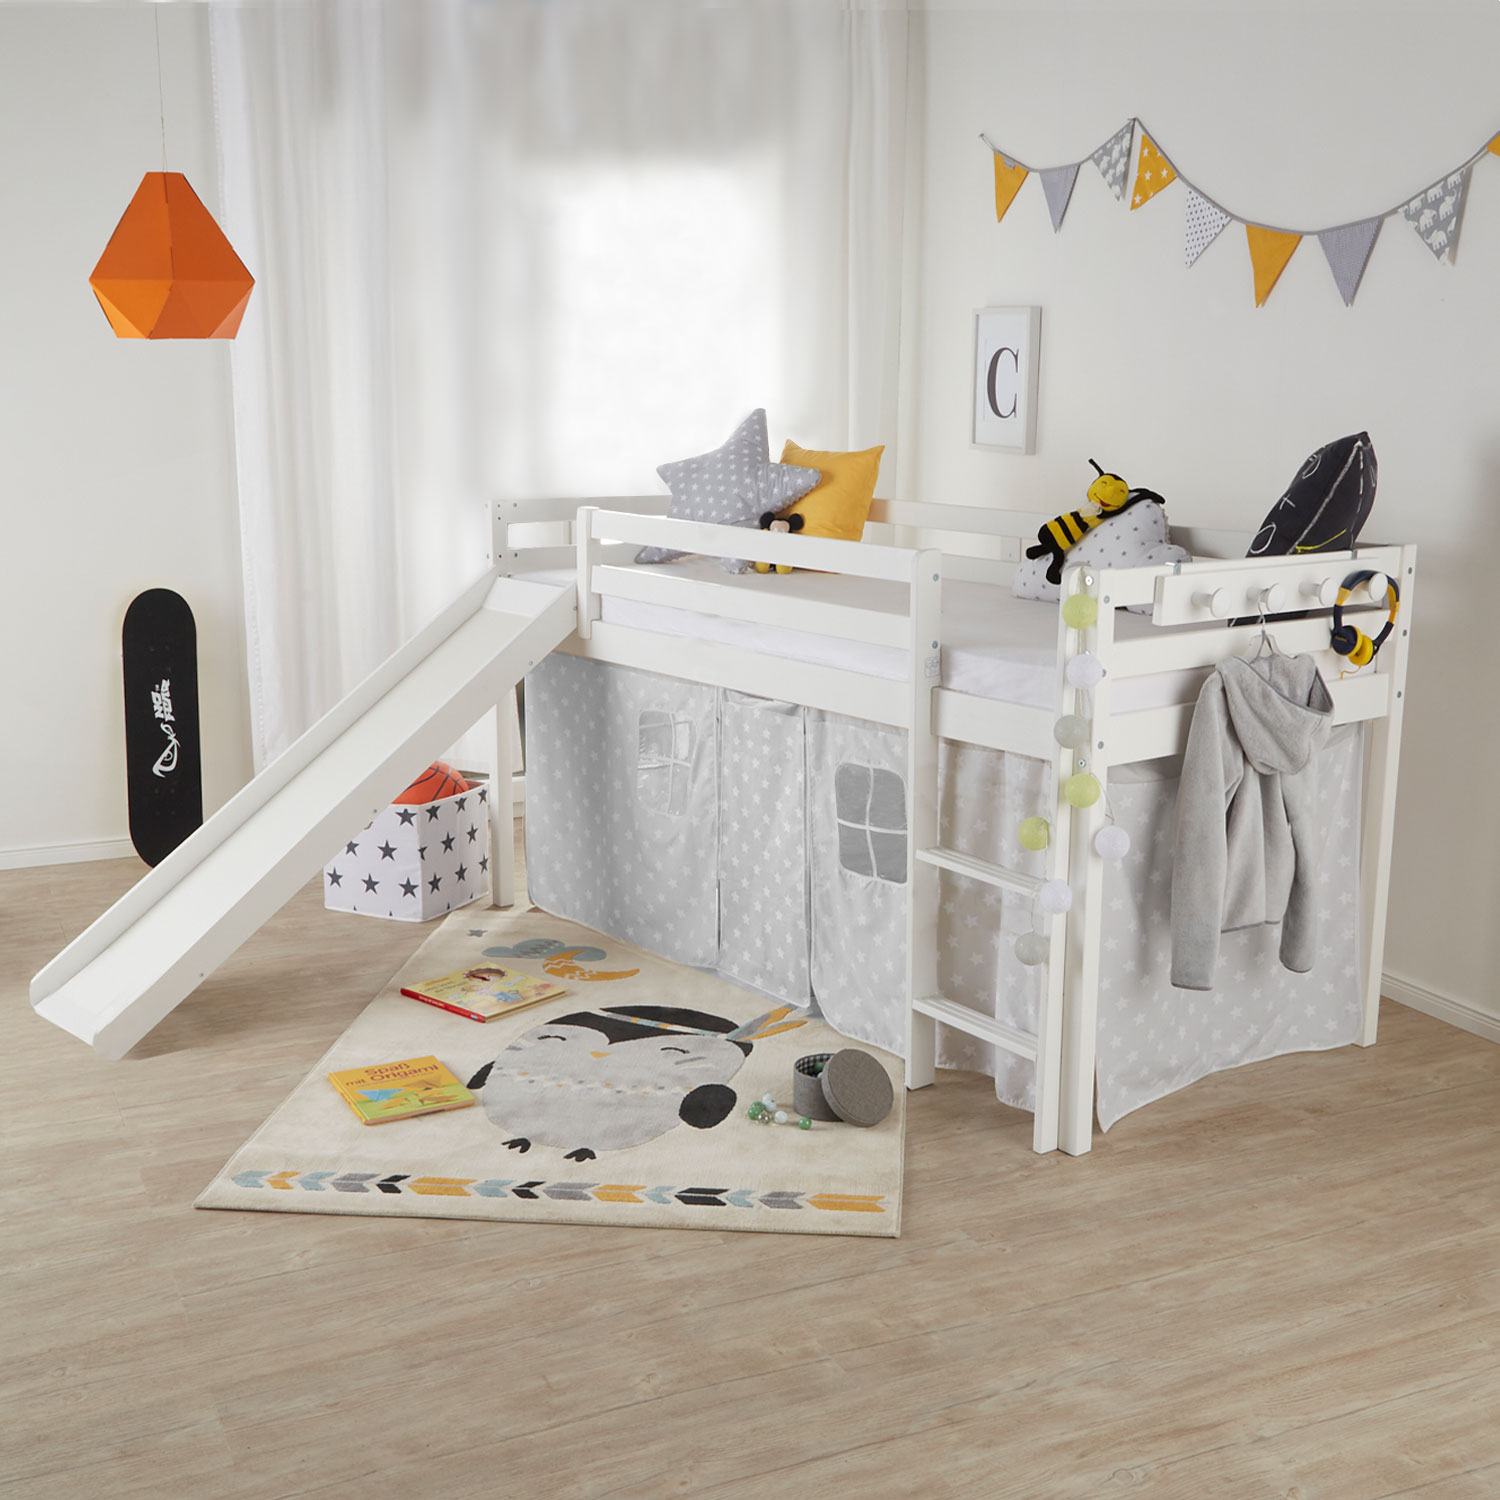 Cabin Bunk Bed 90x200 cm High sleeper Bed white or grey Wooden bed Childrens bed